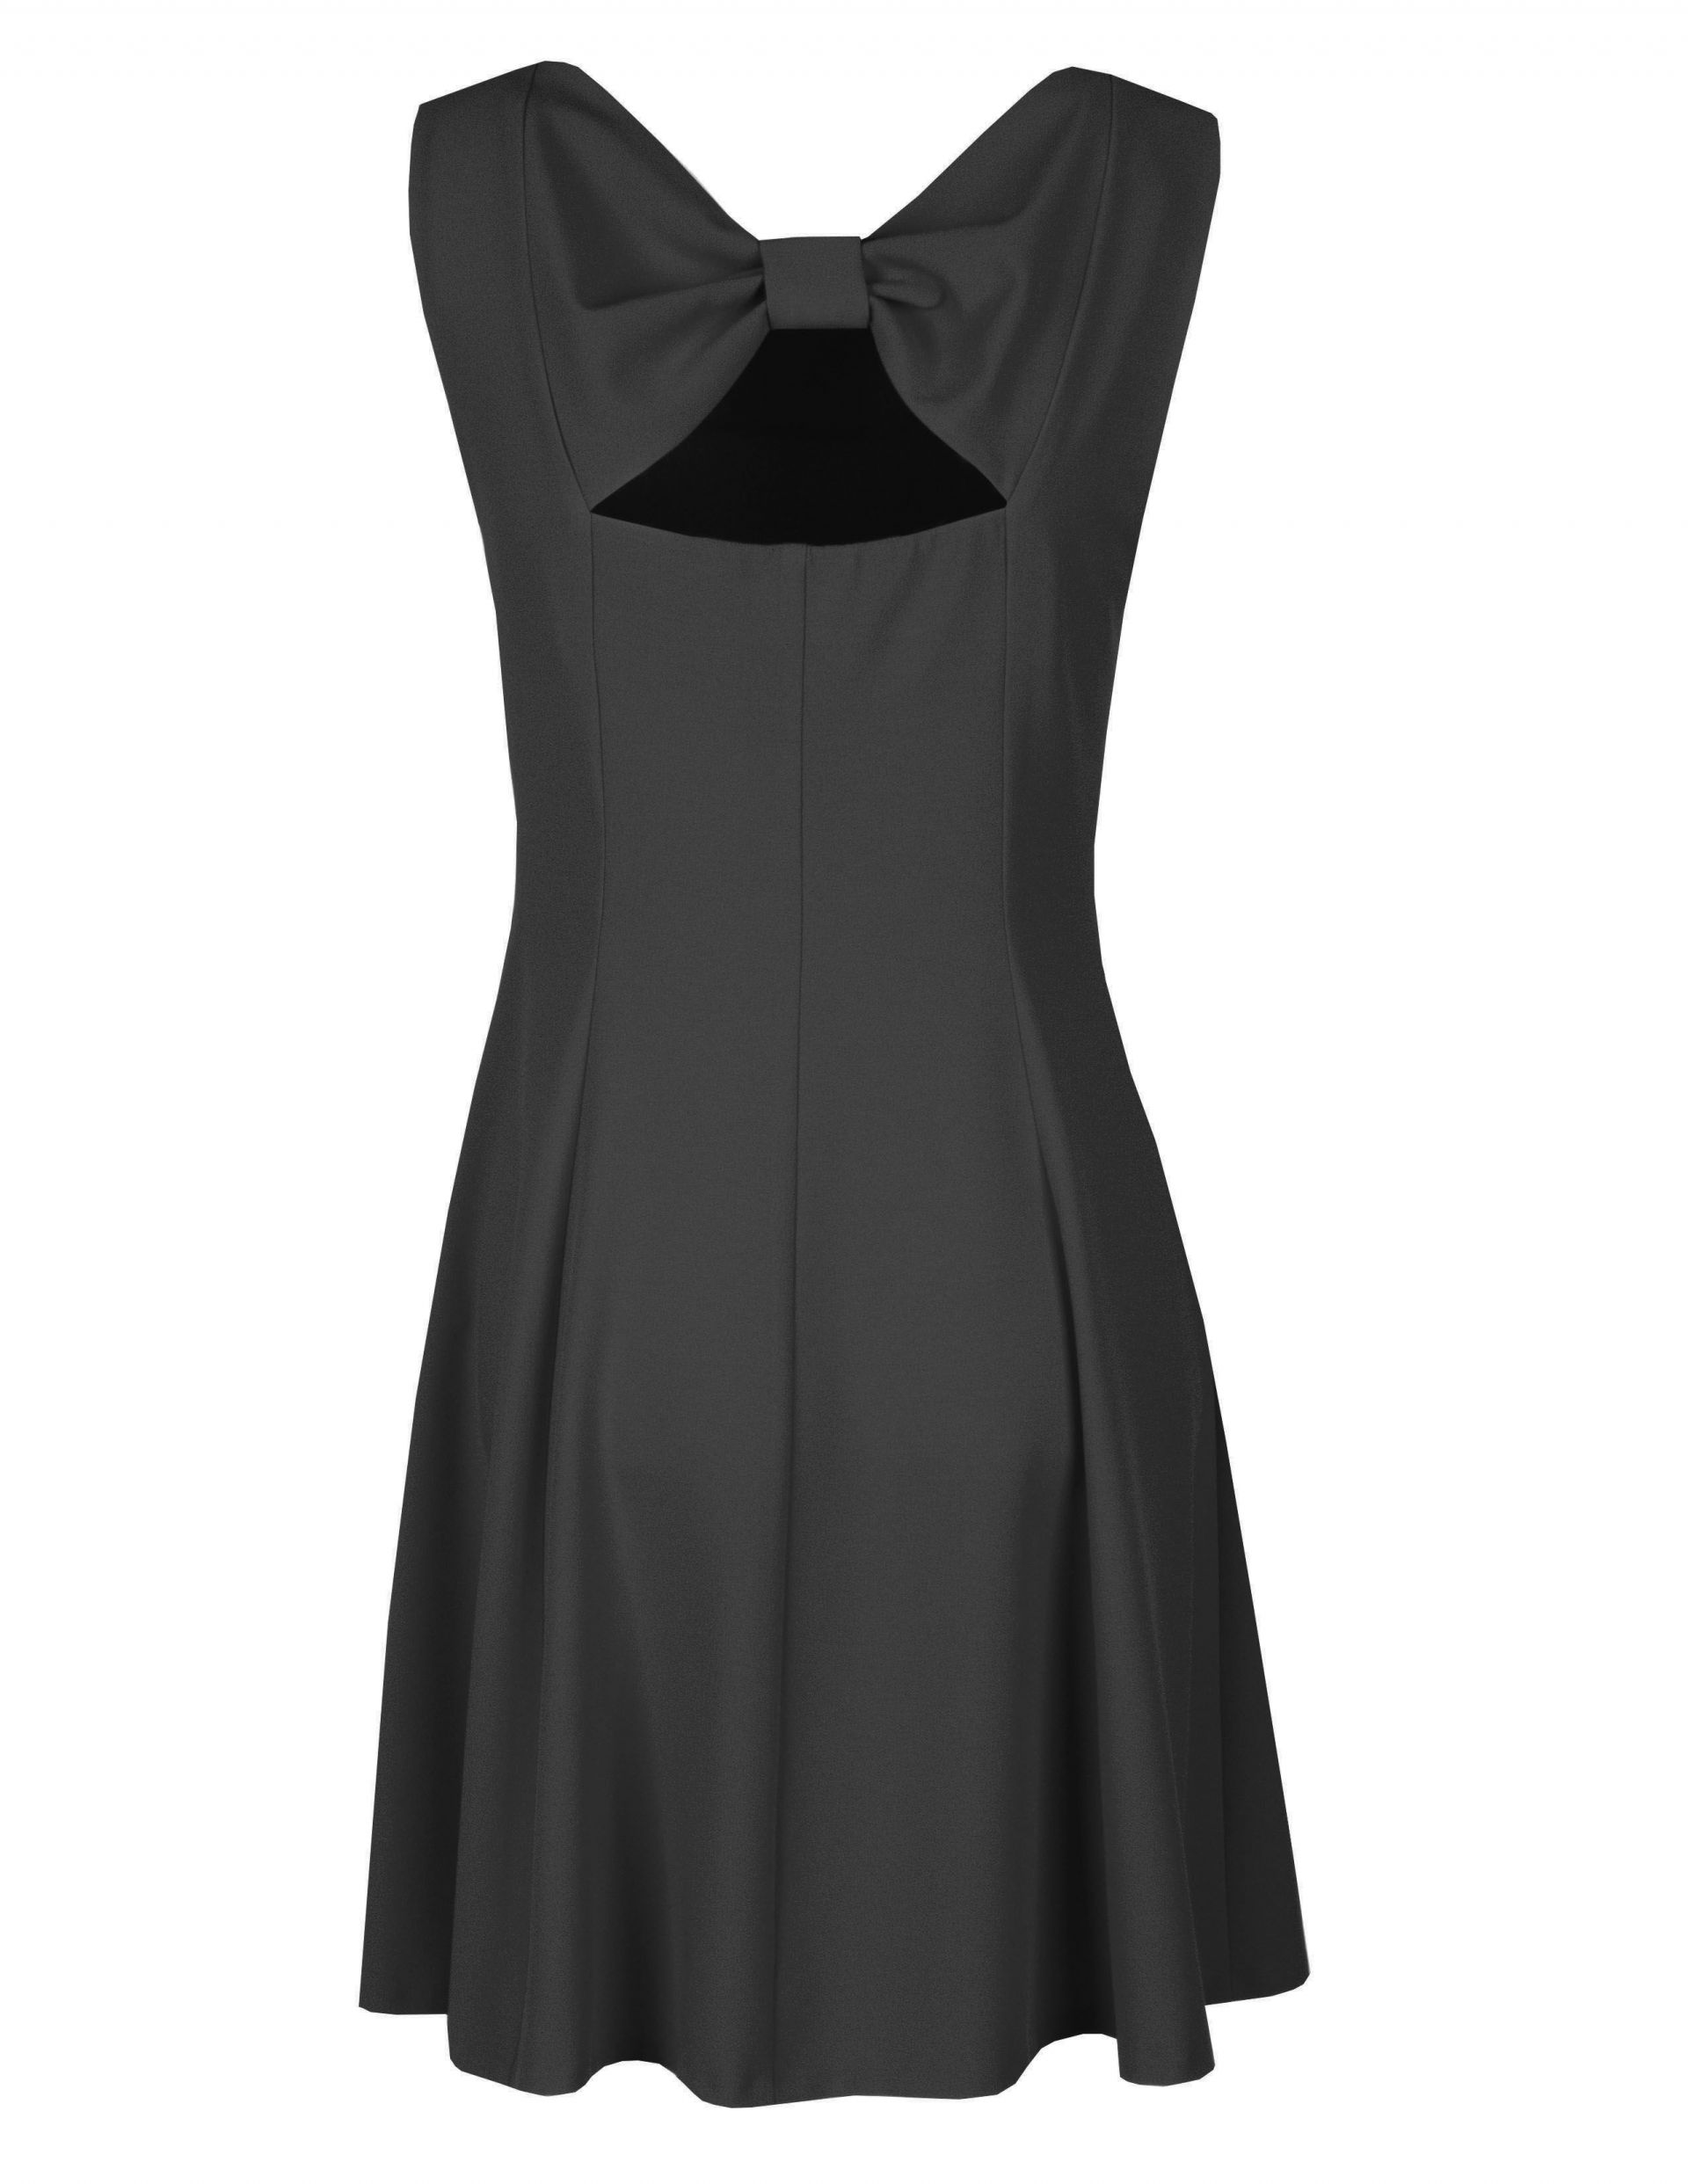 Sleeveless dress with round neck and bow on the backside 1